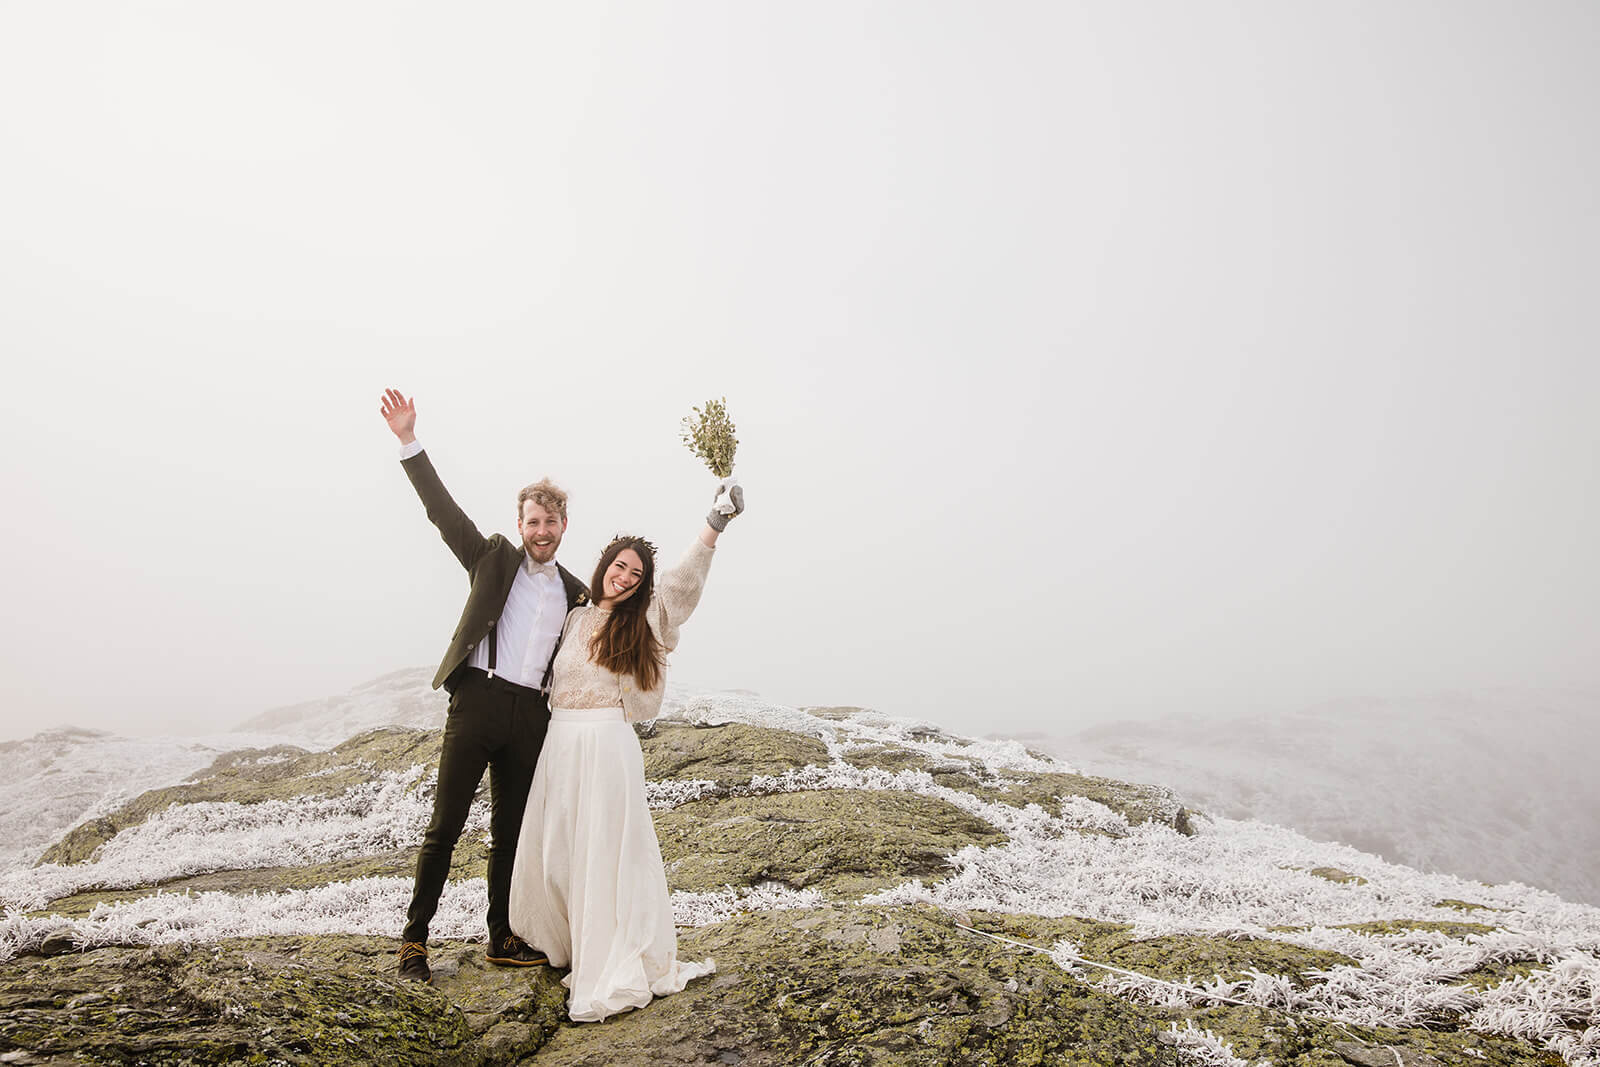  Eloping couple celebrates in frosty conditions during their adventure elopement on Mt. Mansfield, Vermont’s tallest mountain.  Vermont mountain wedding. Vermont winter elopement. Vermont elopement packages. 